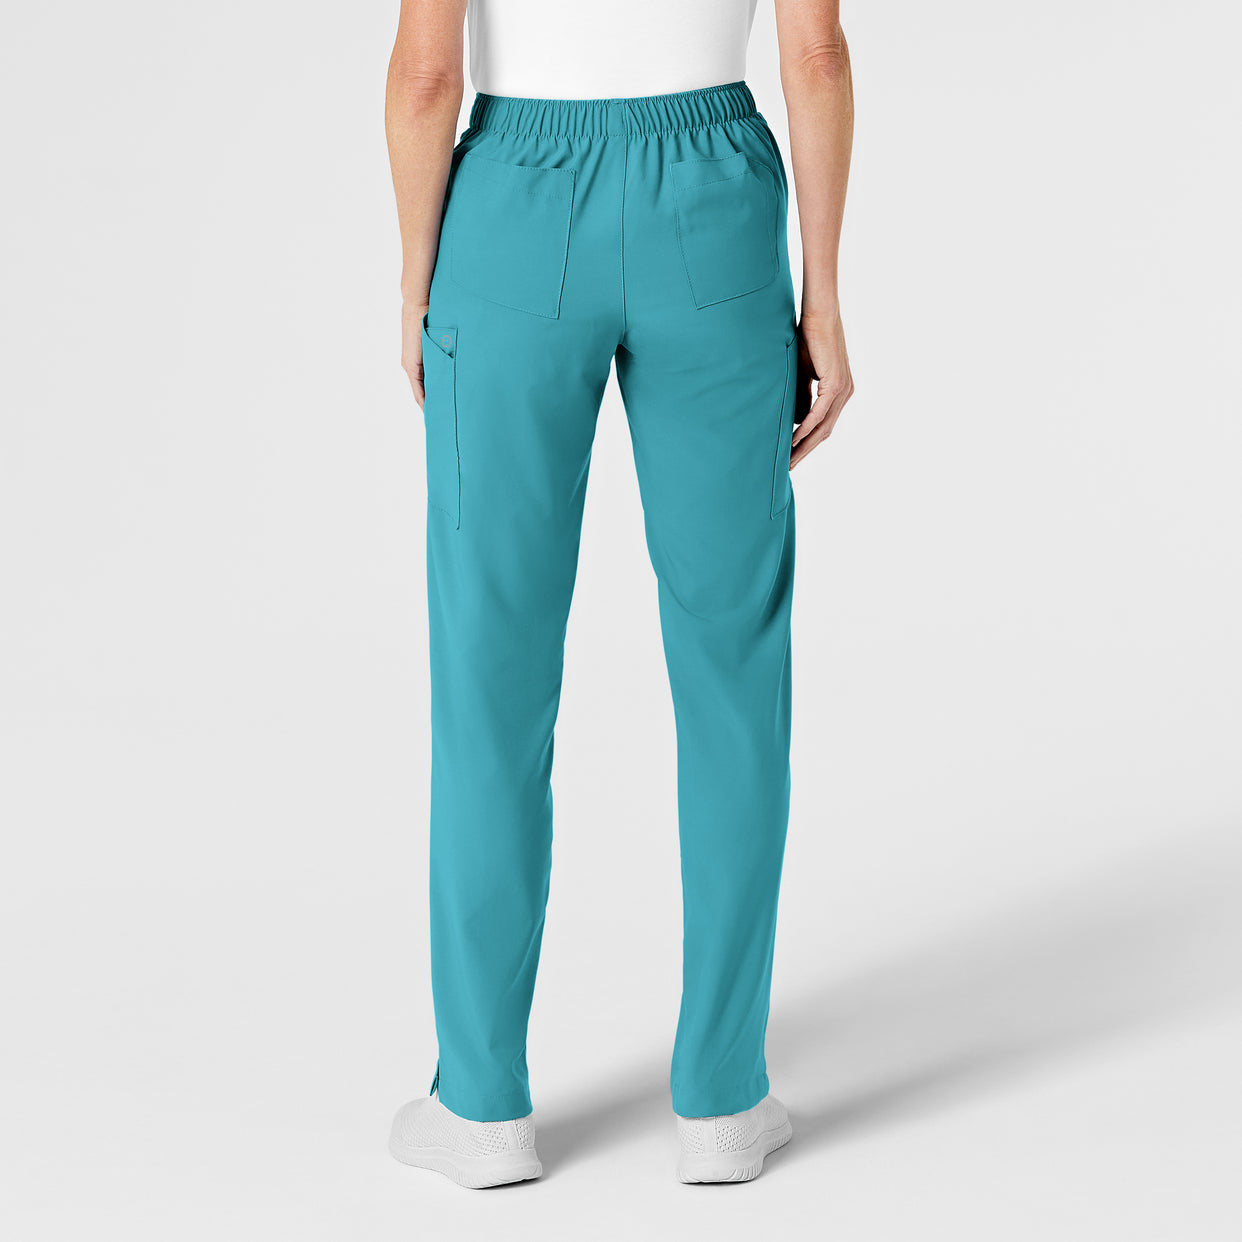 W123 Women's Flat Front Cargo Scrub Pant Teal Blue back view